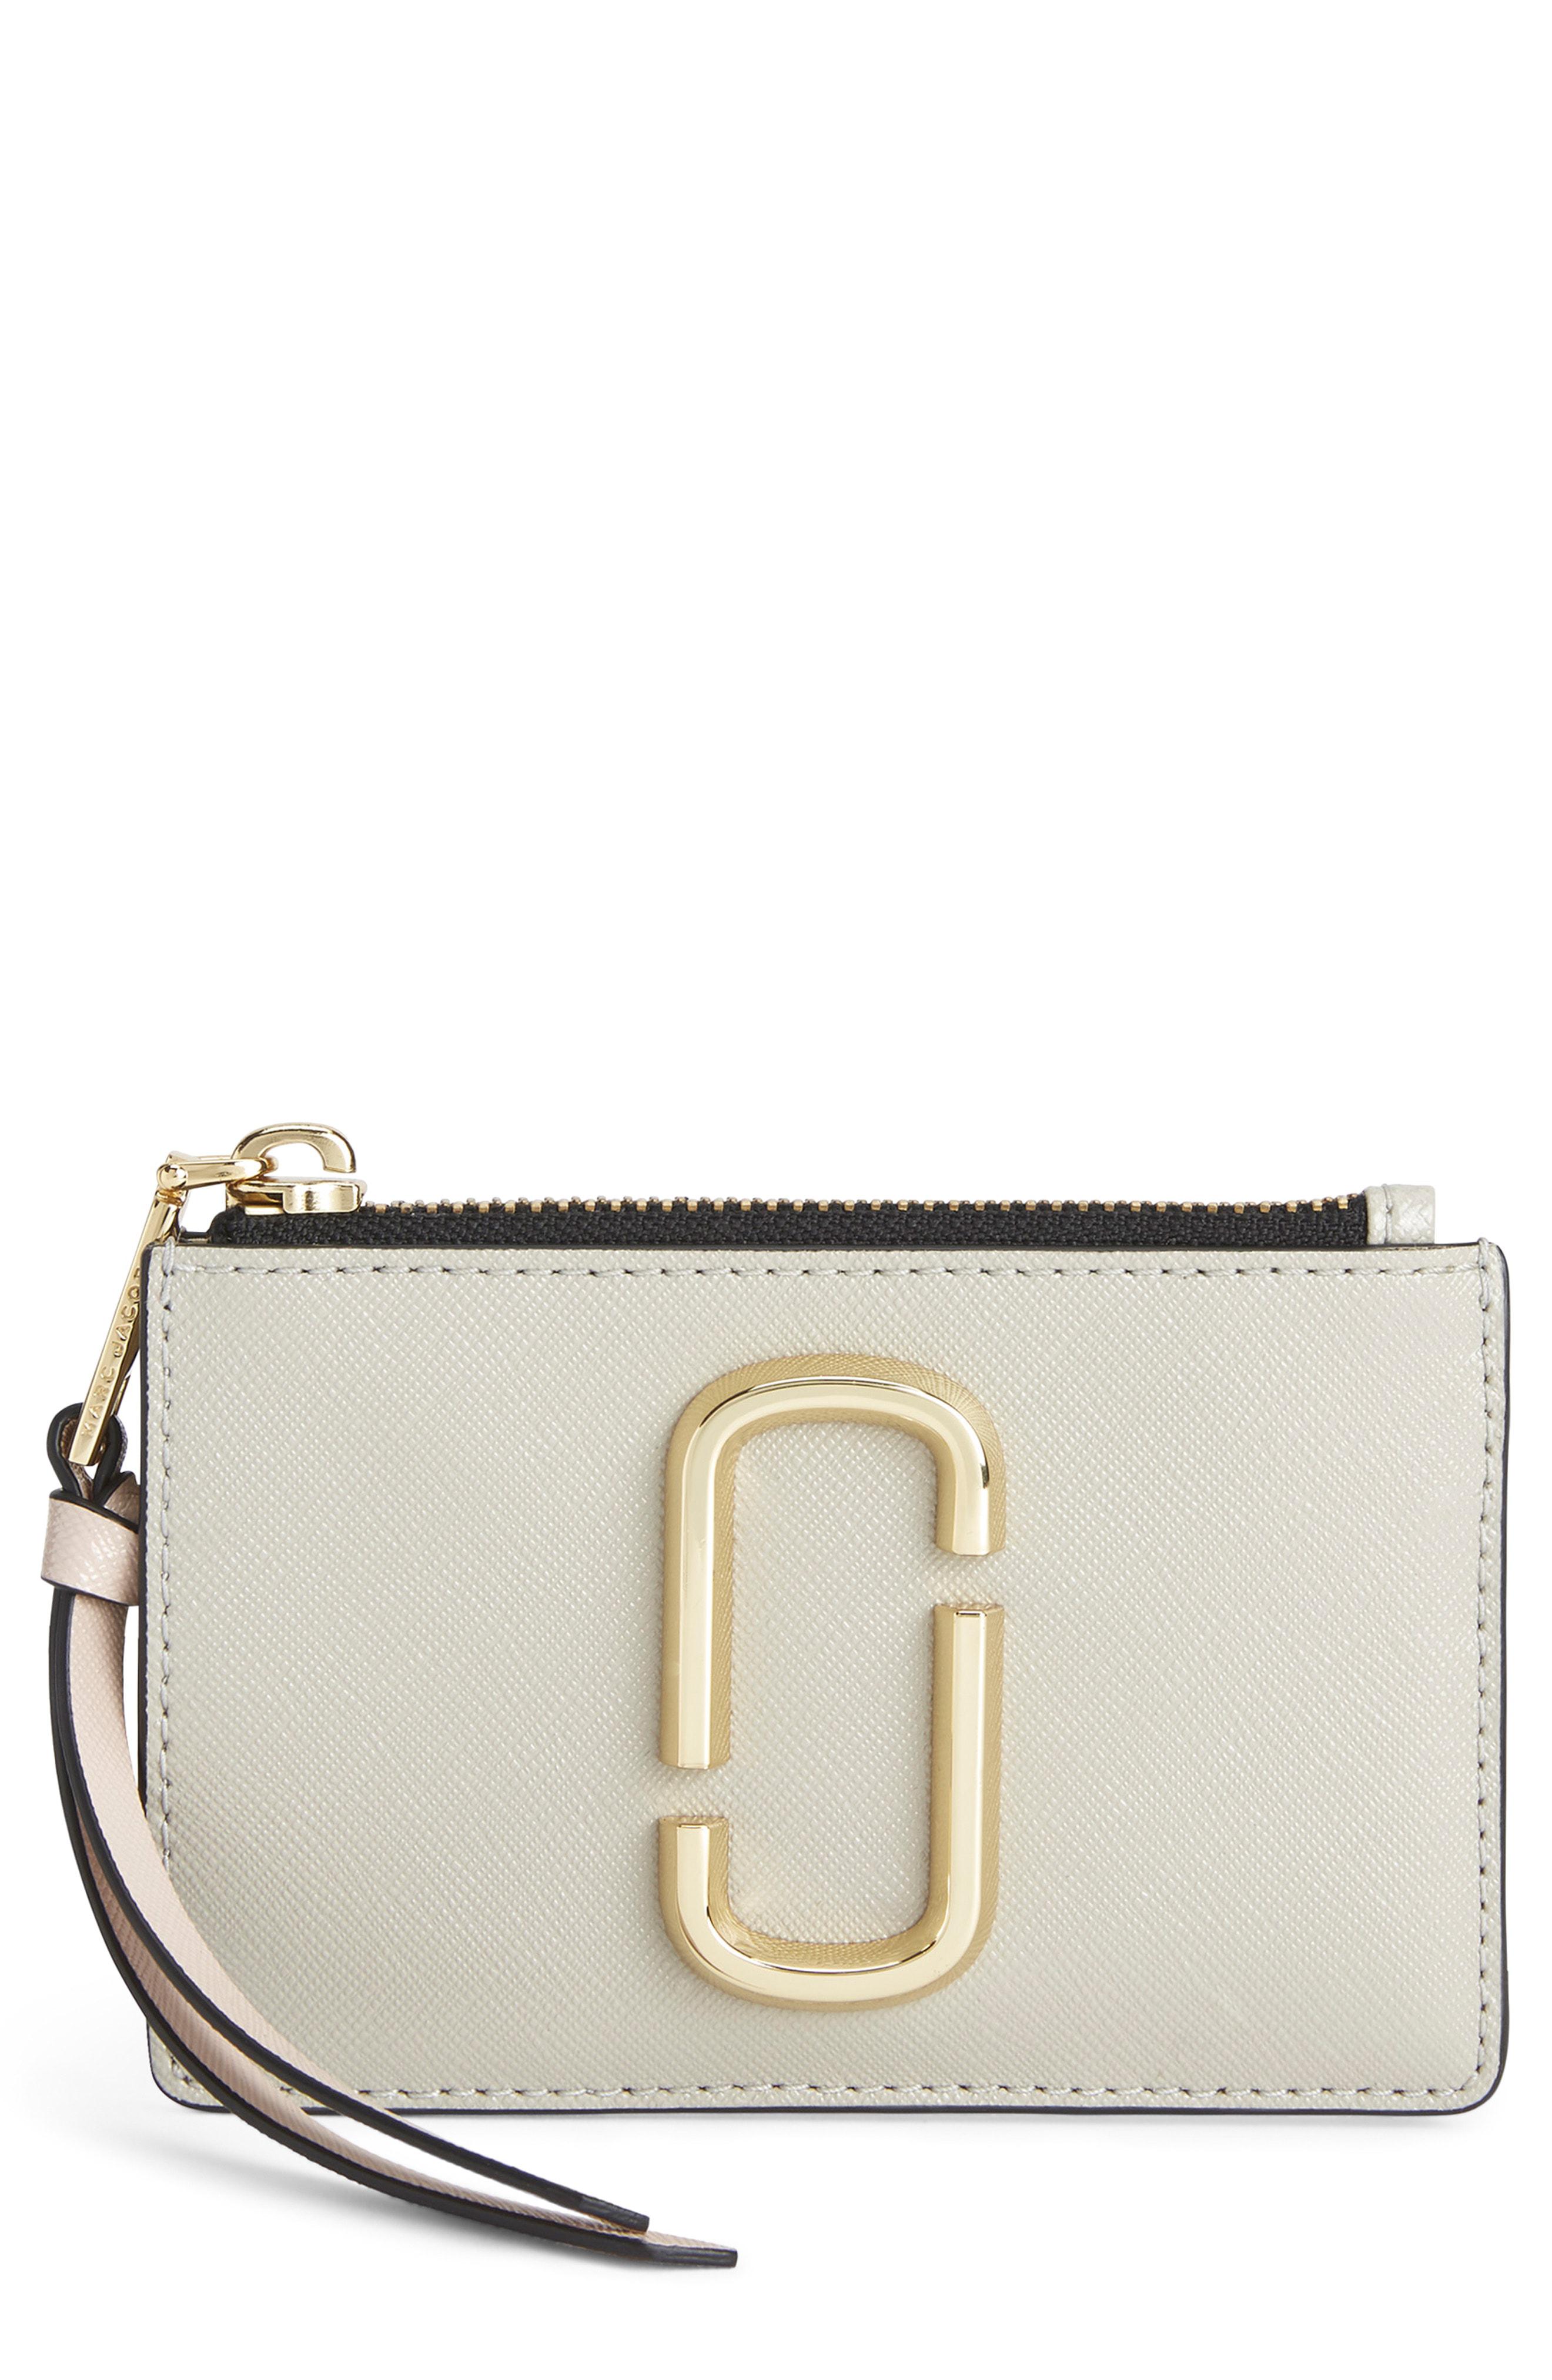 Lyst - Marc Jacobs Snapshot Small Leather Wallet